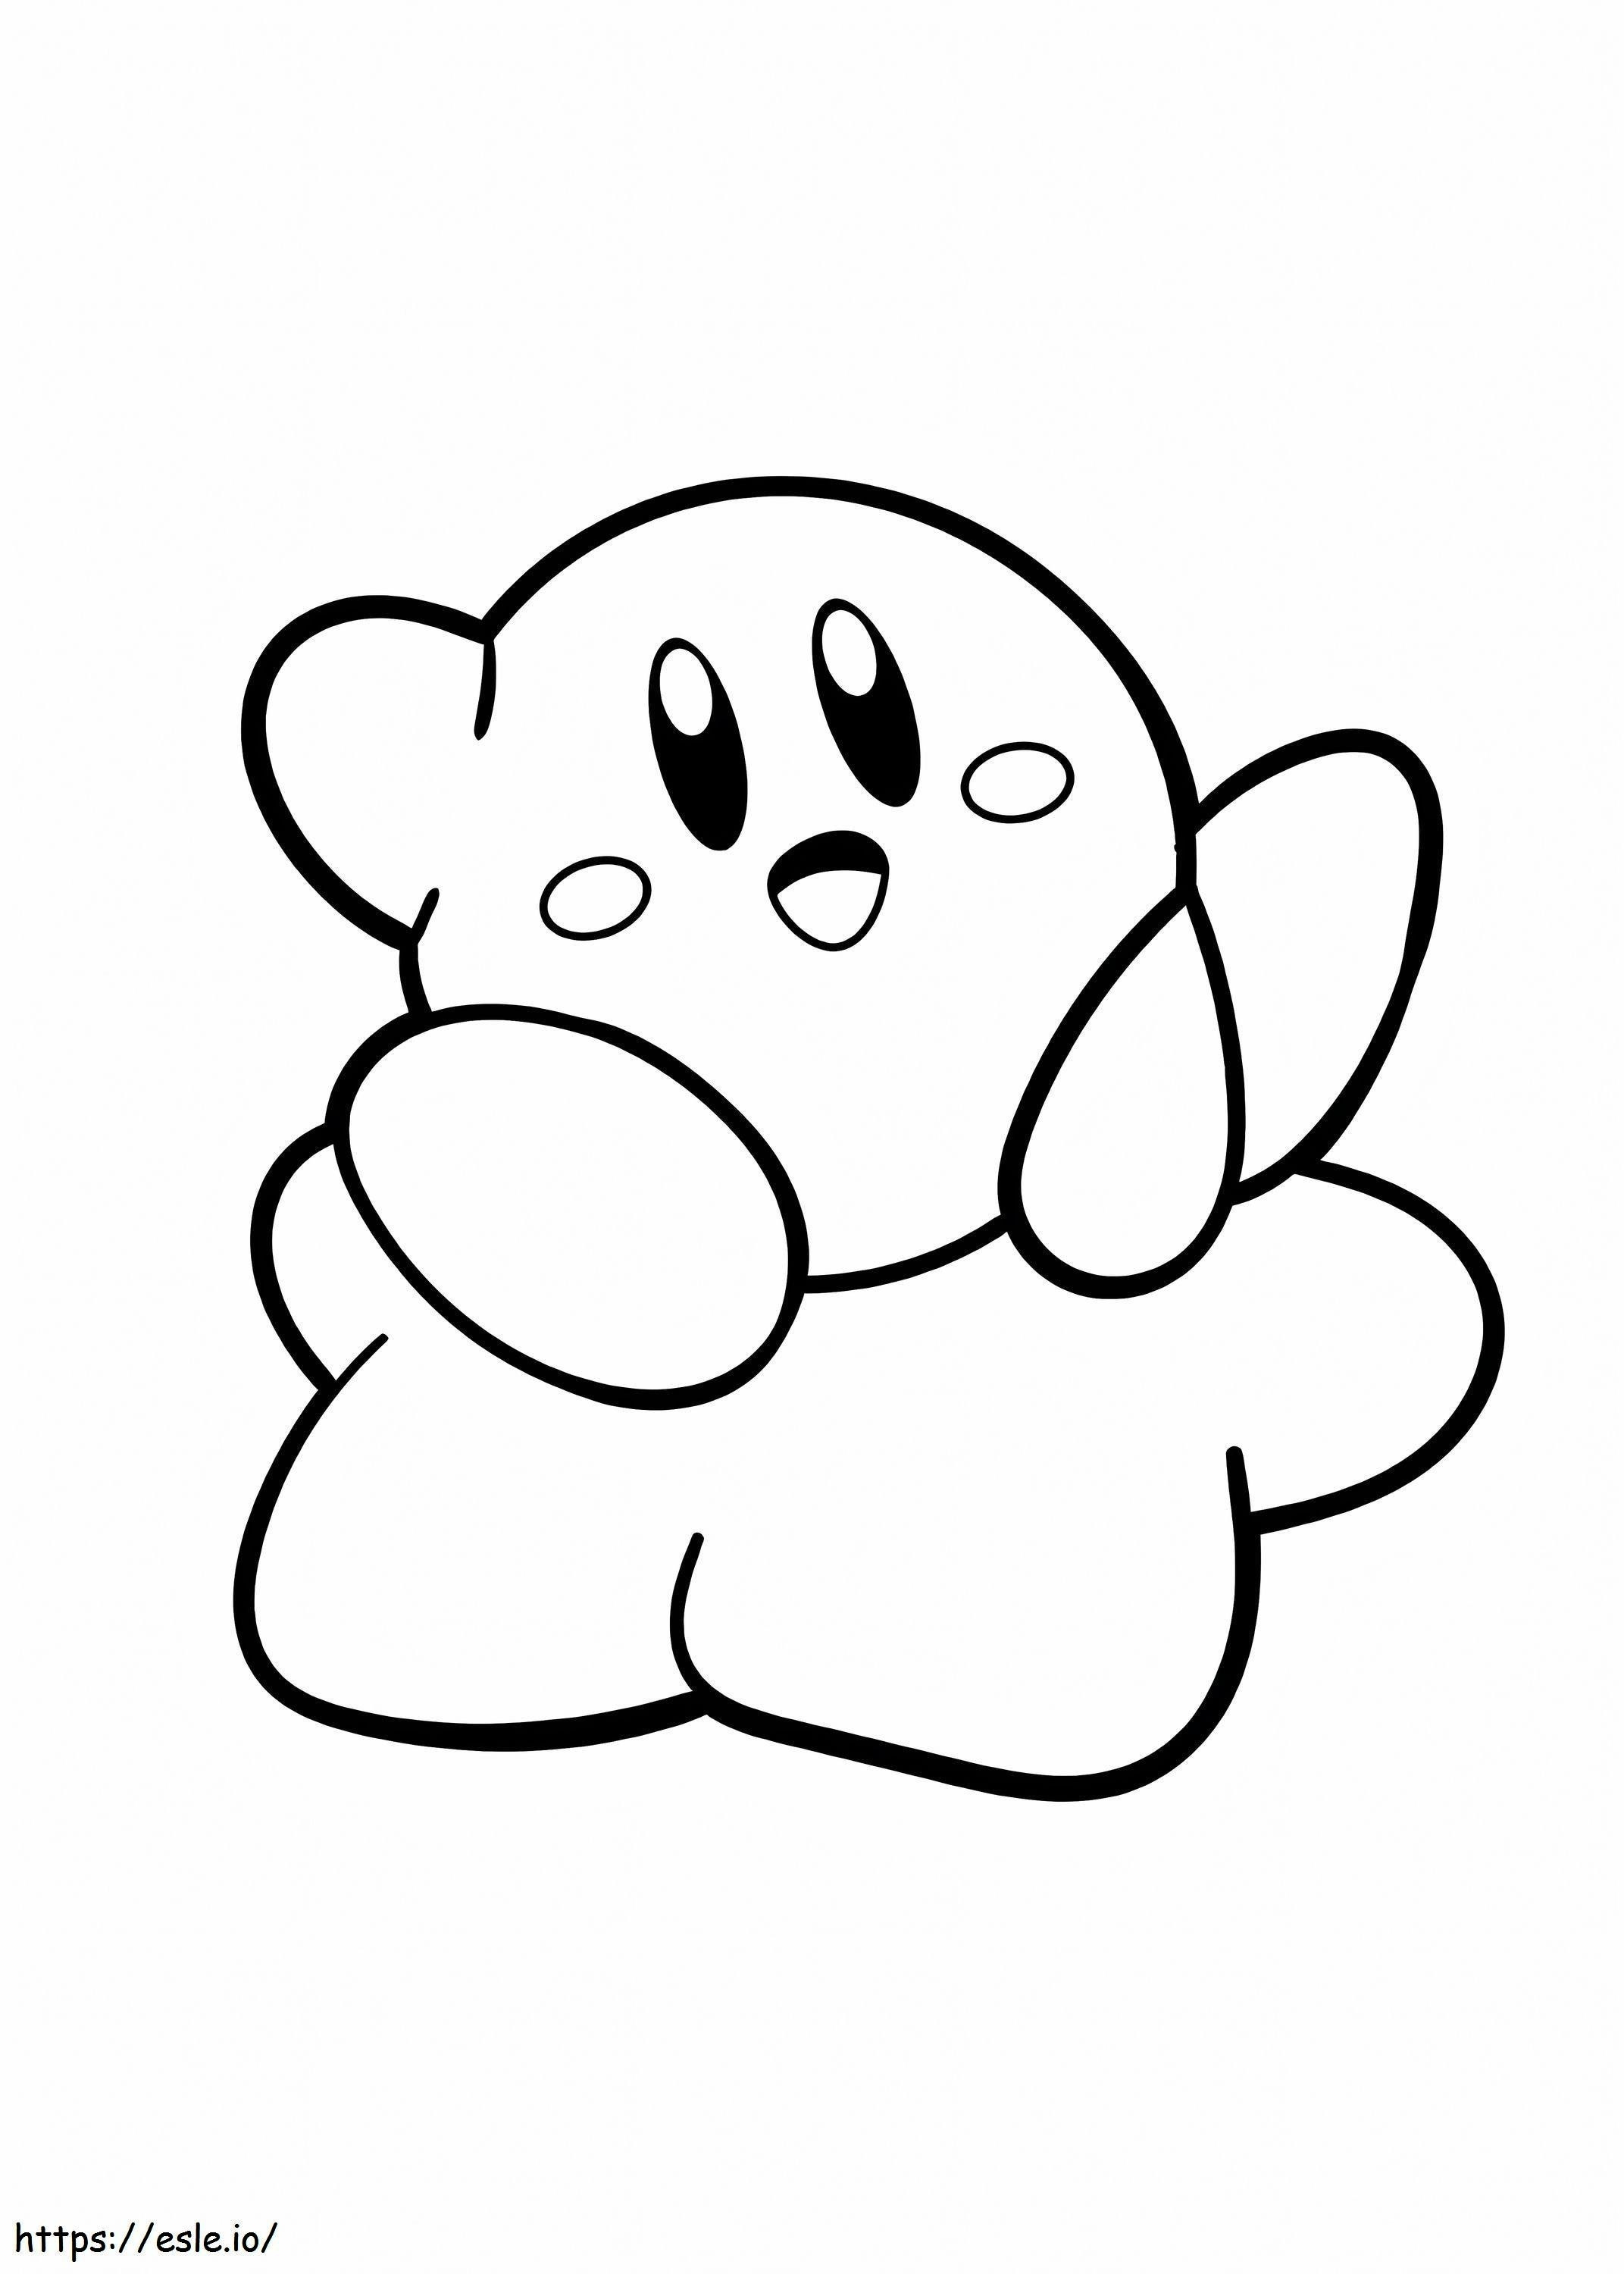 Awesome Kirby coloring page